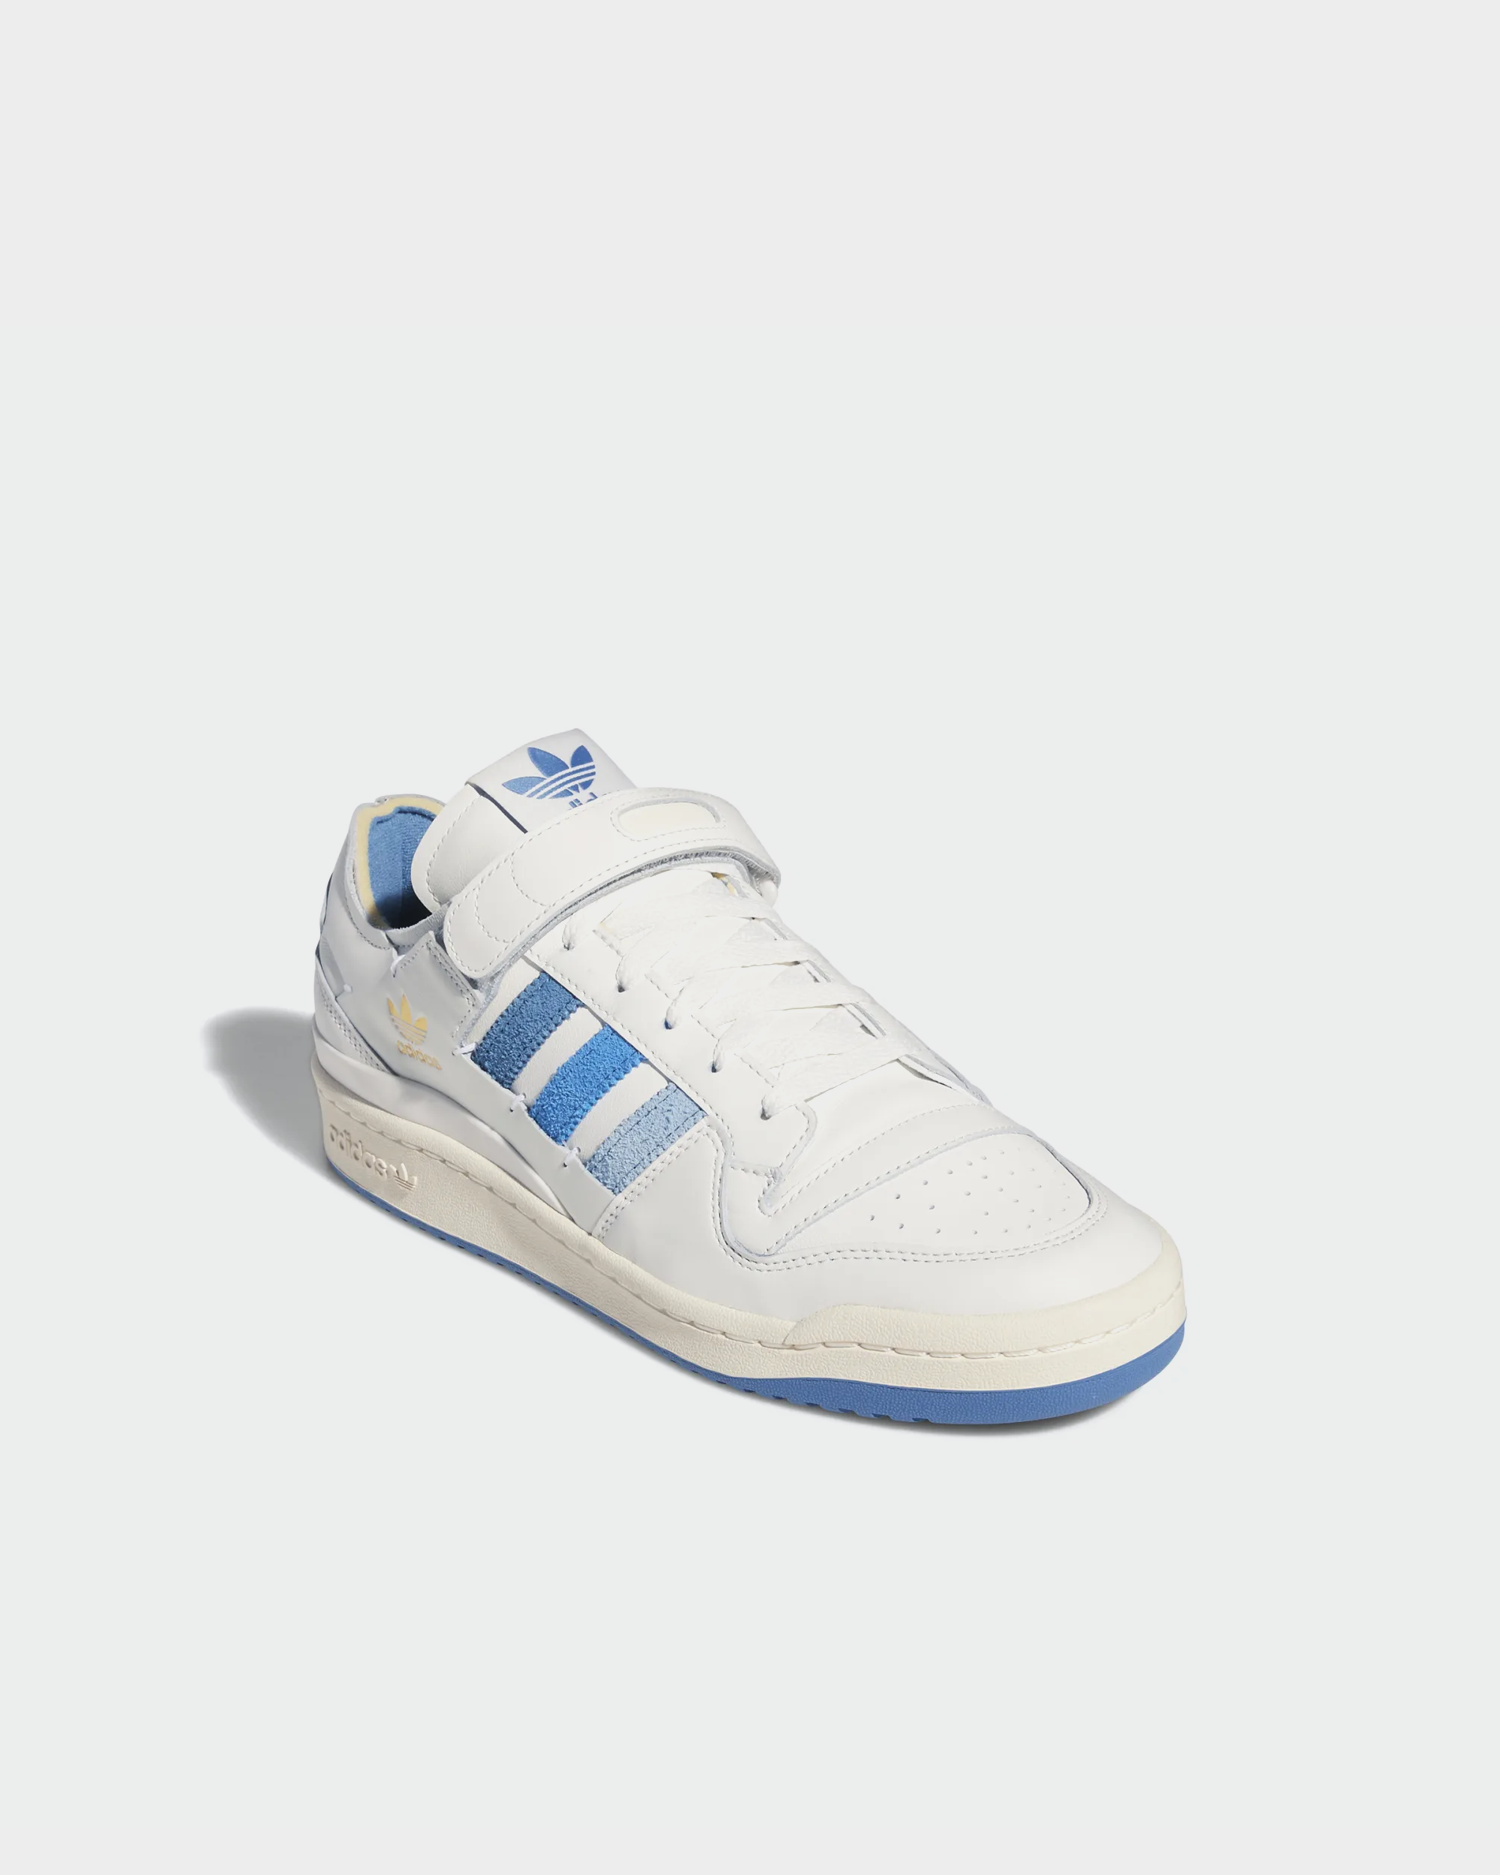 Adidas Forum 84 Low Cloud White/Altered Blue/Pulse Blue